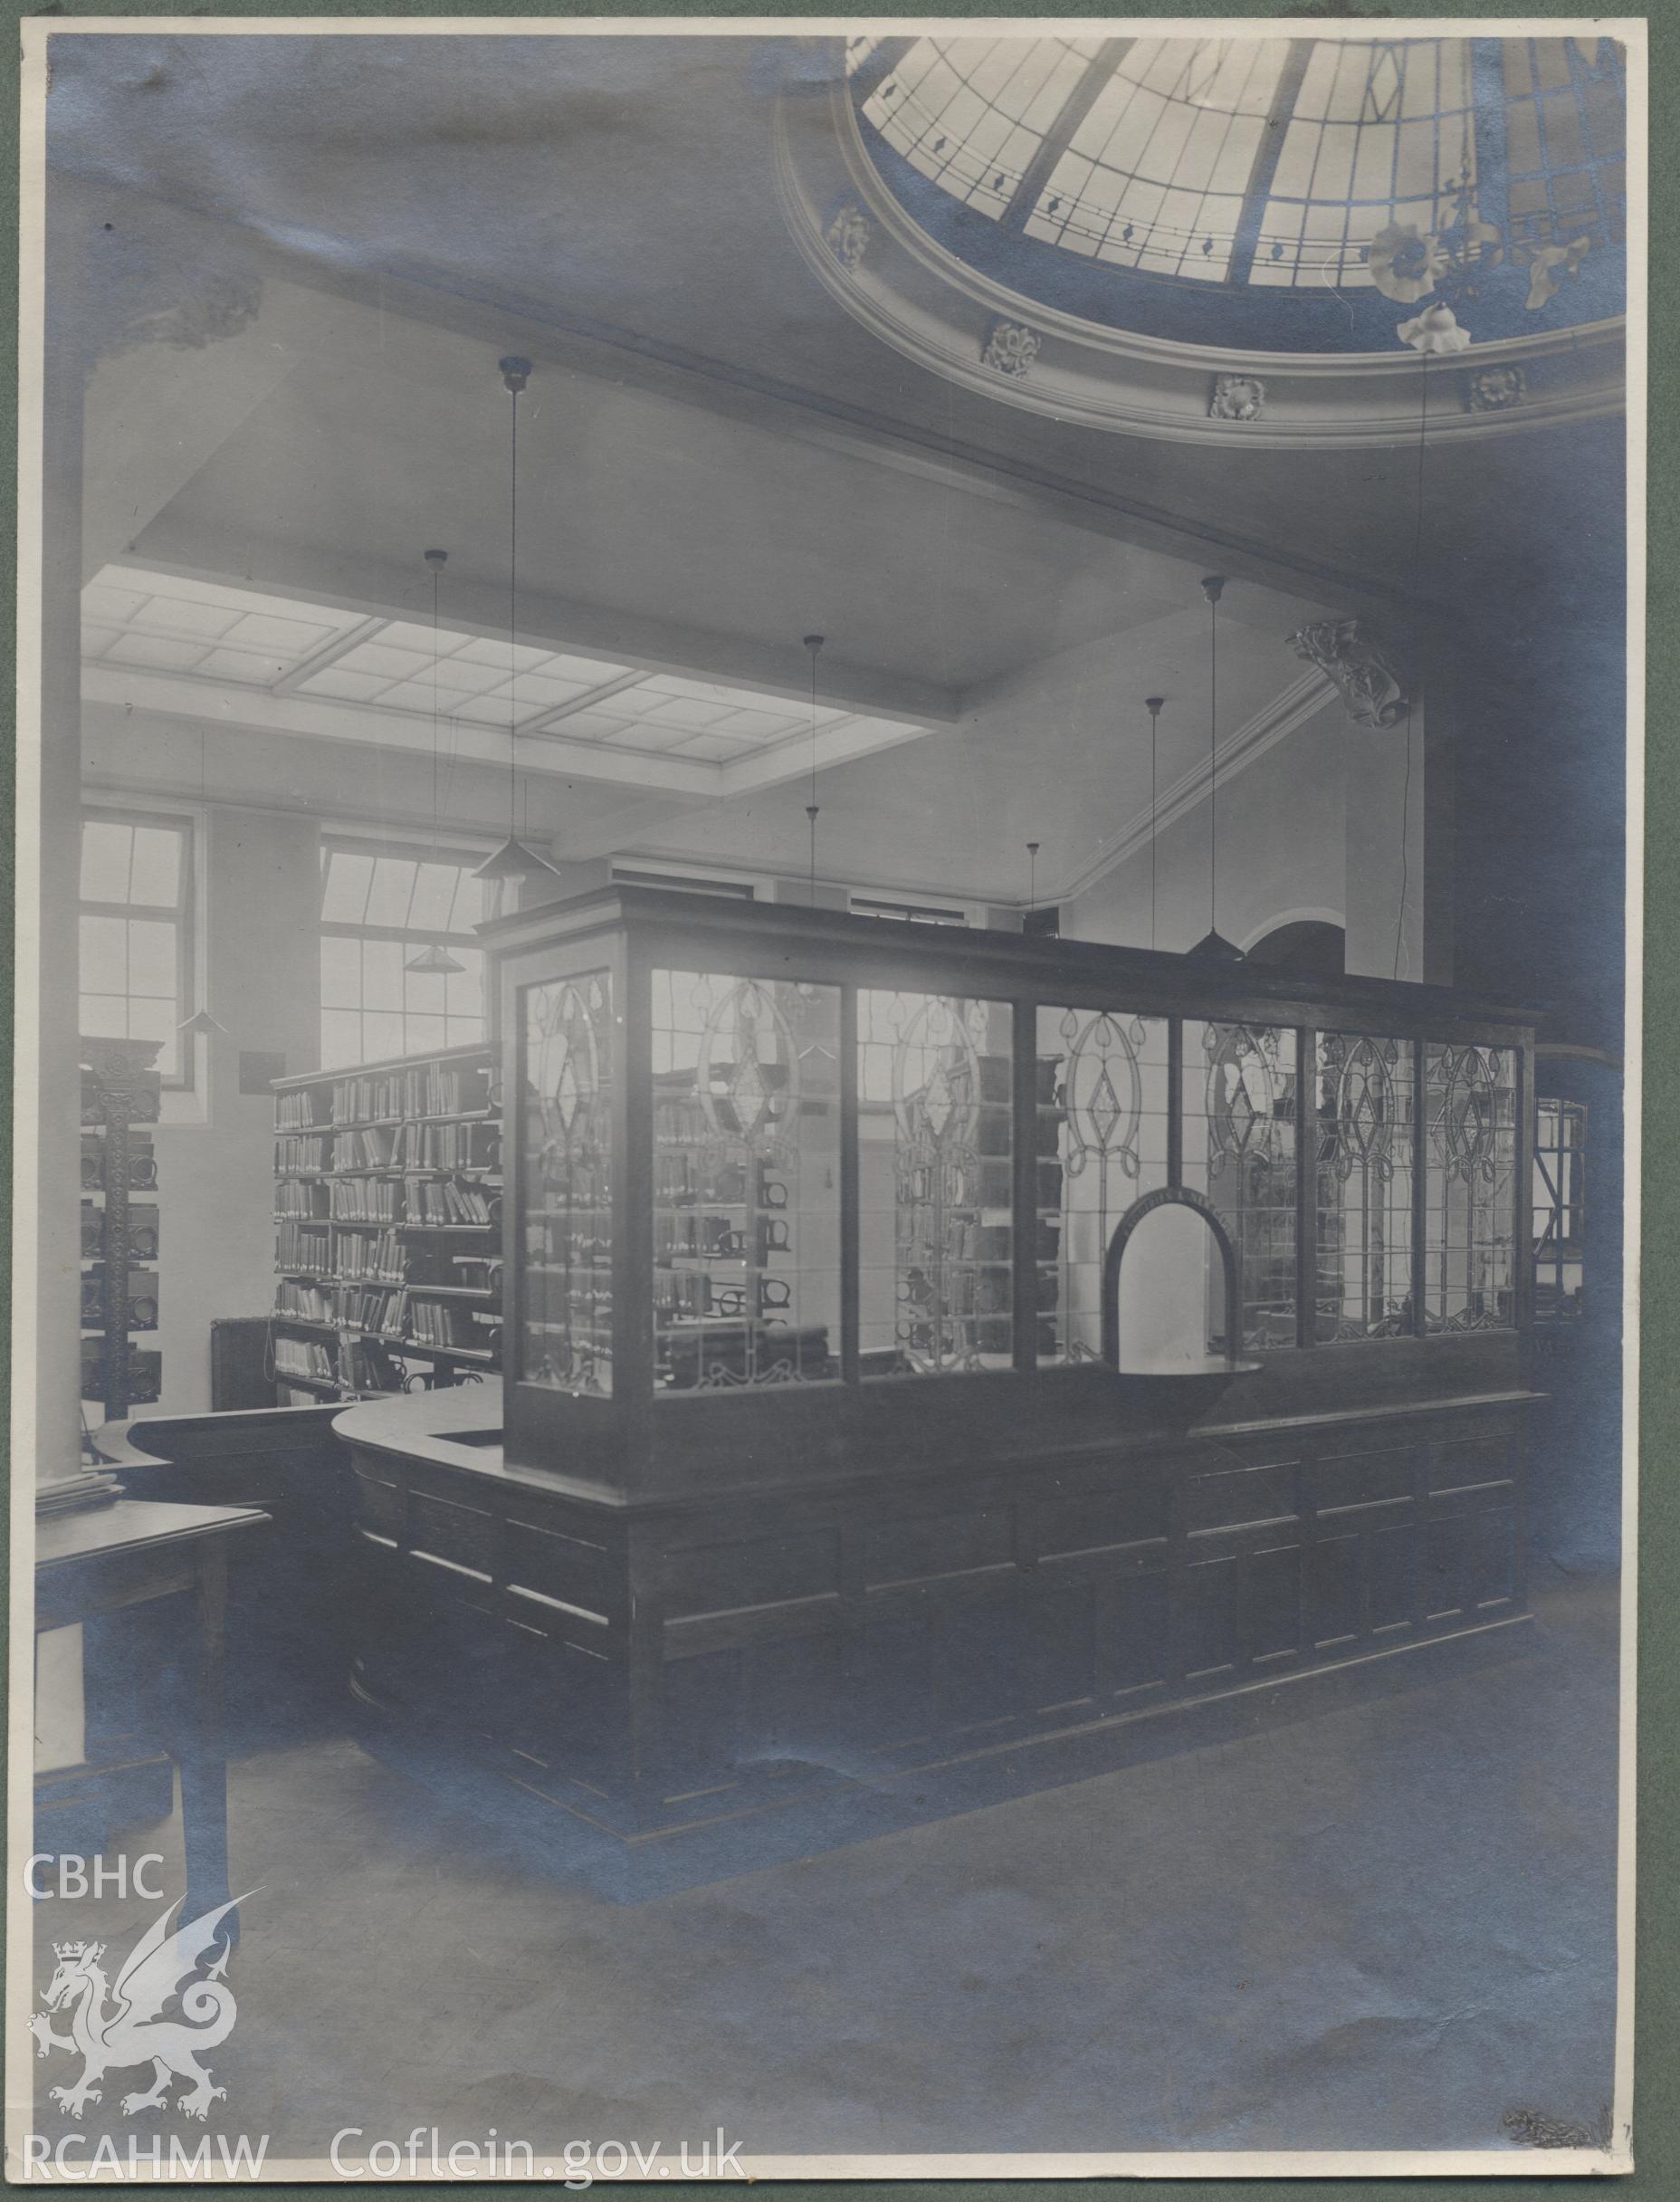 Black and white photograph showing part of the interior of Cathays Public Library, Cardiff.